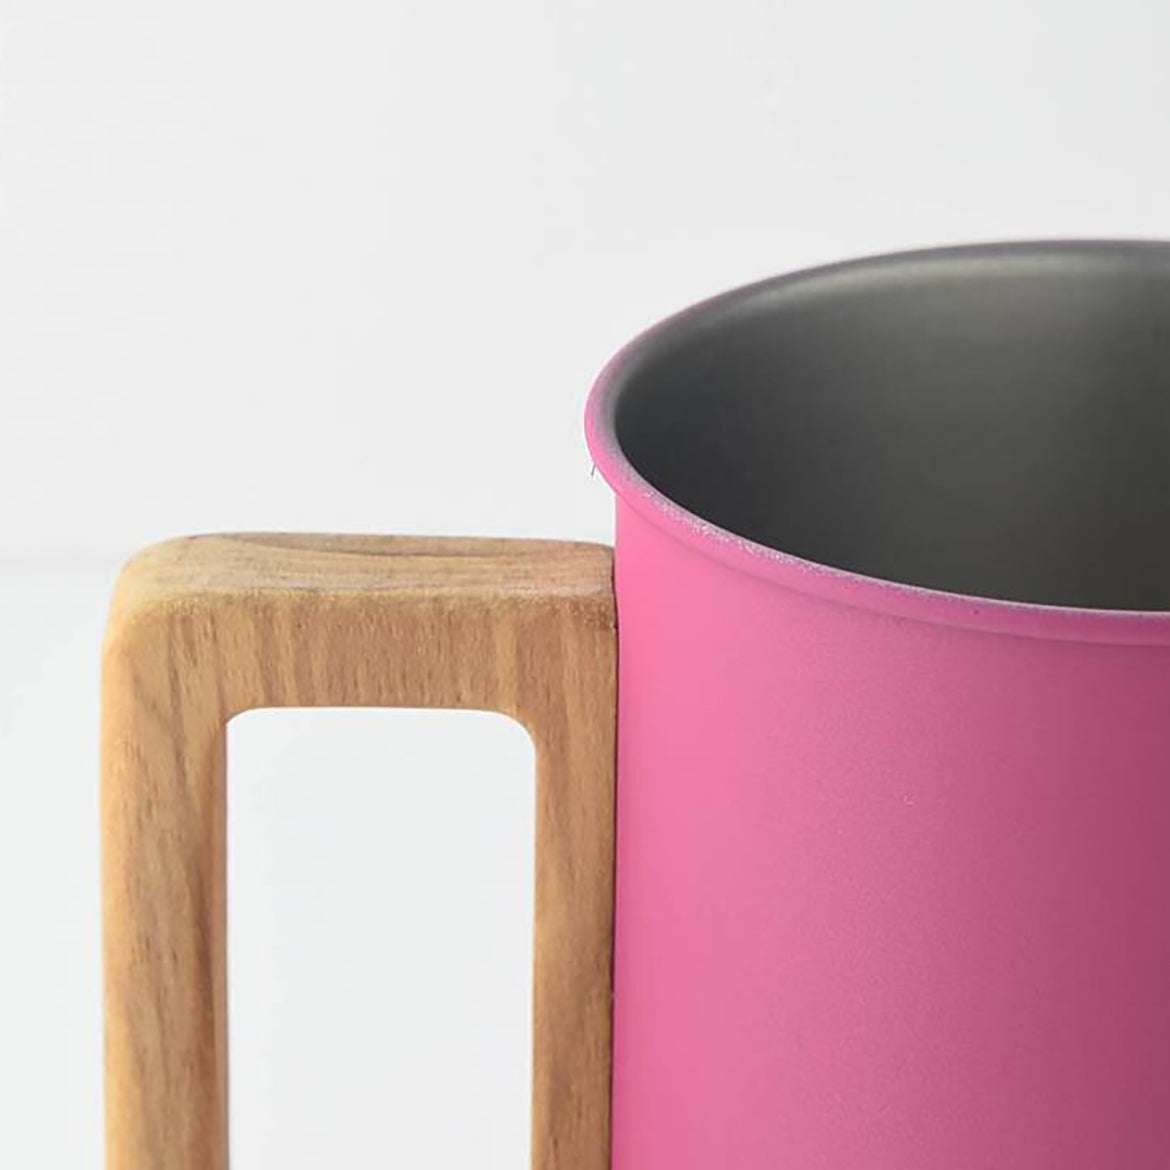 Not a simple mug – stainless steel mug with wooden handle